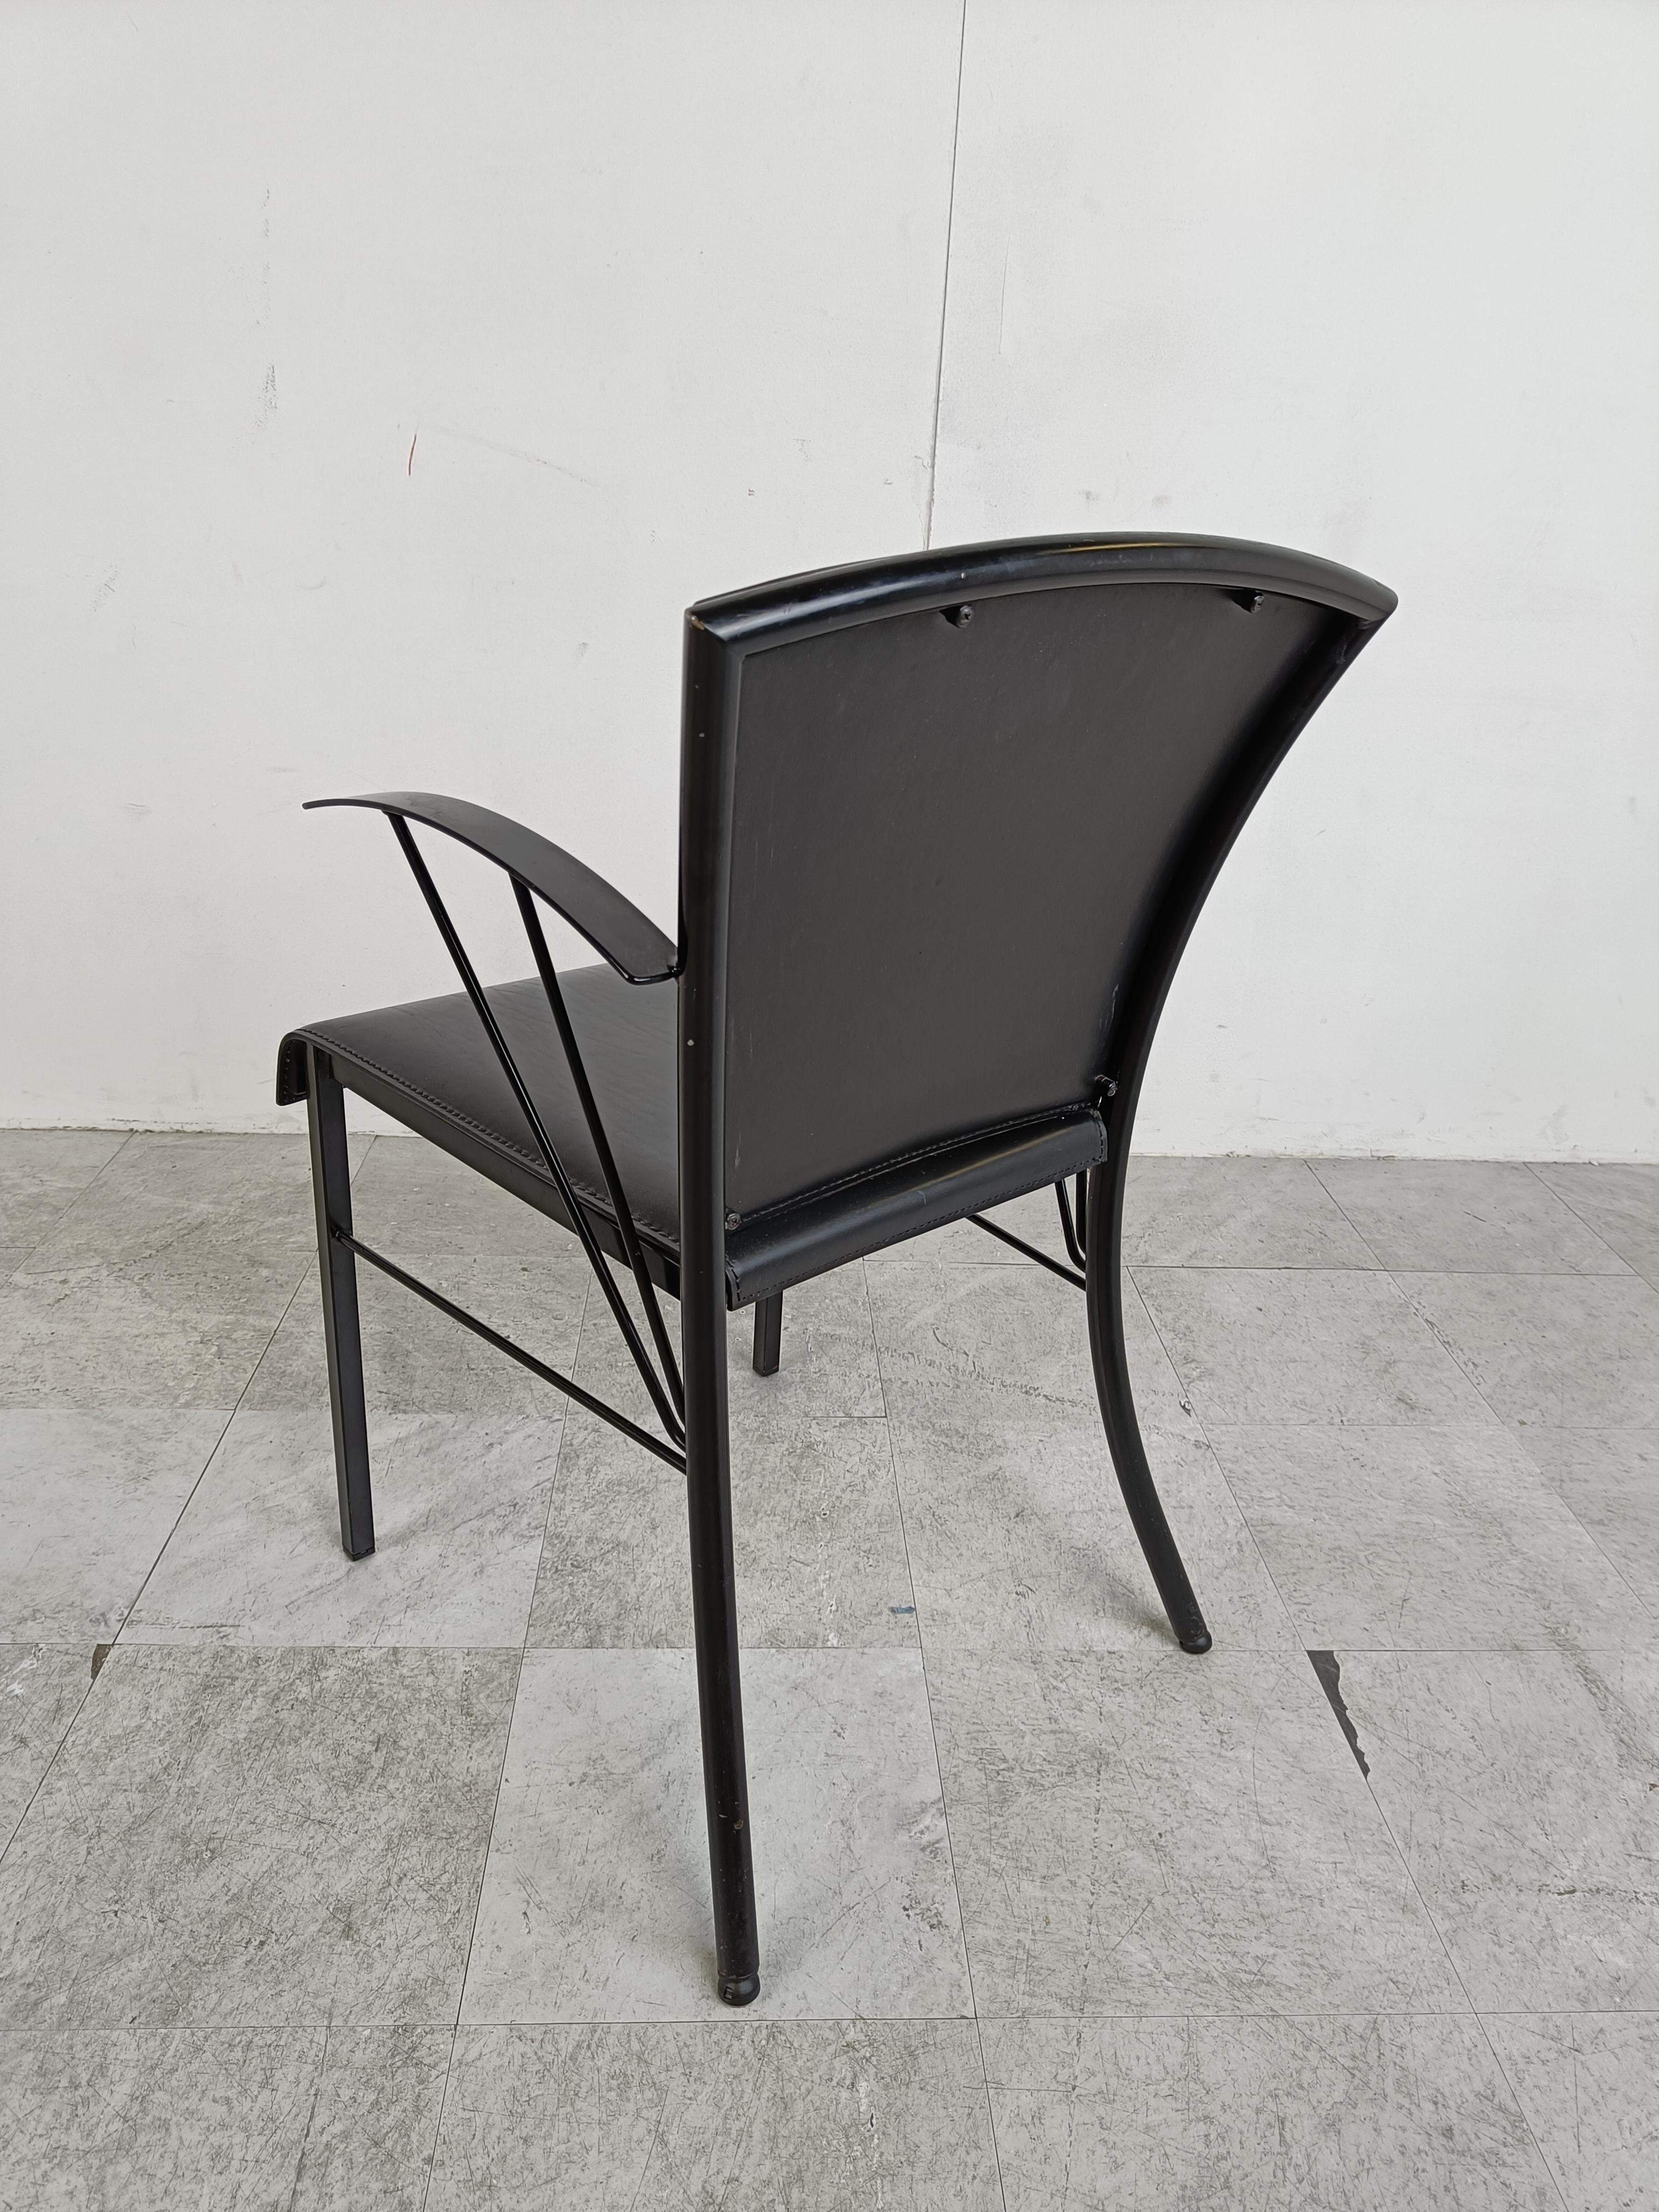 Vintage Black Leather Dining Chairs by Arrben, 1980s For Sale 6